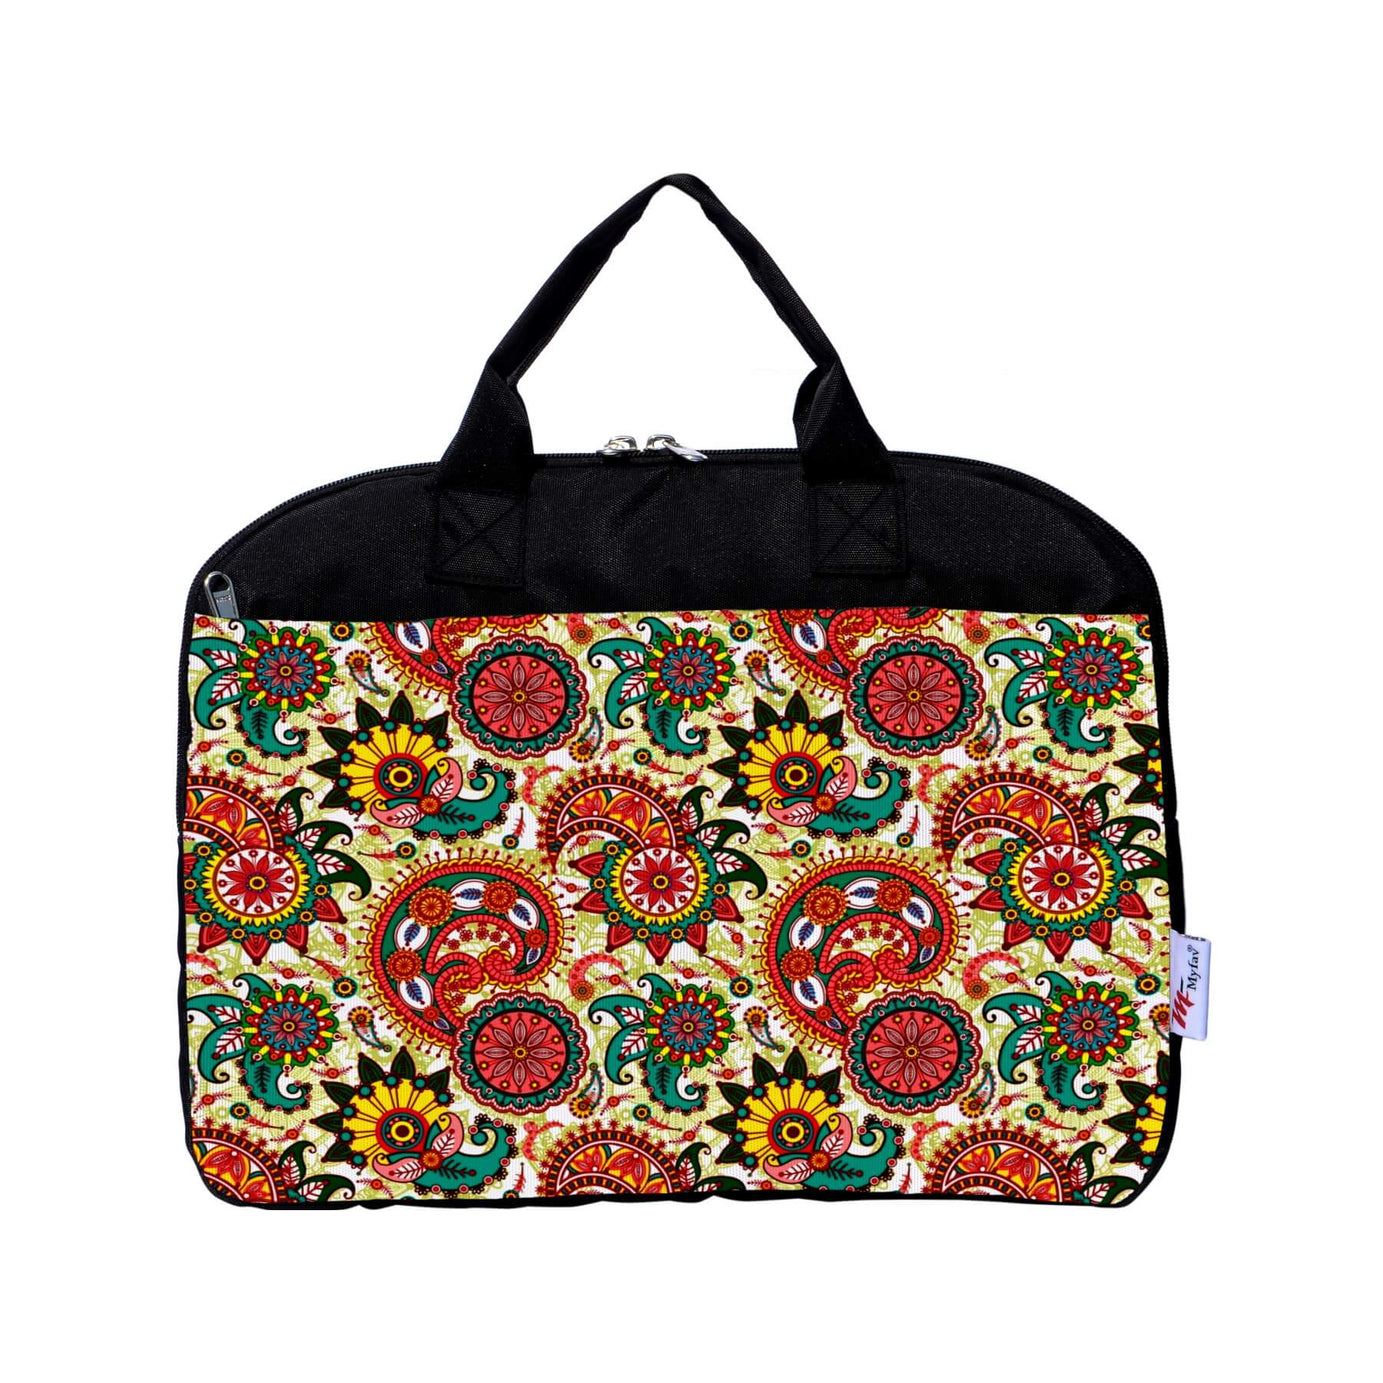 My Fav Traditional Print Office Laptop Bag Briefcase 15.6 Inch for Women and Men